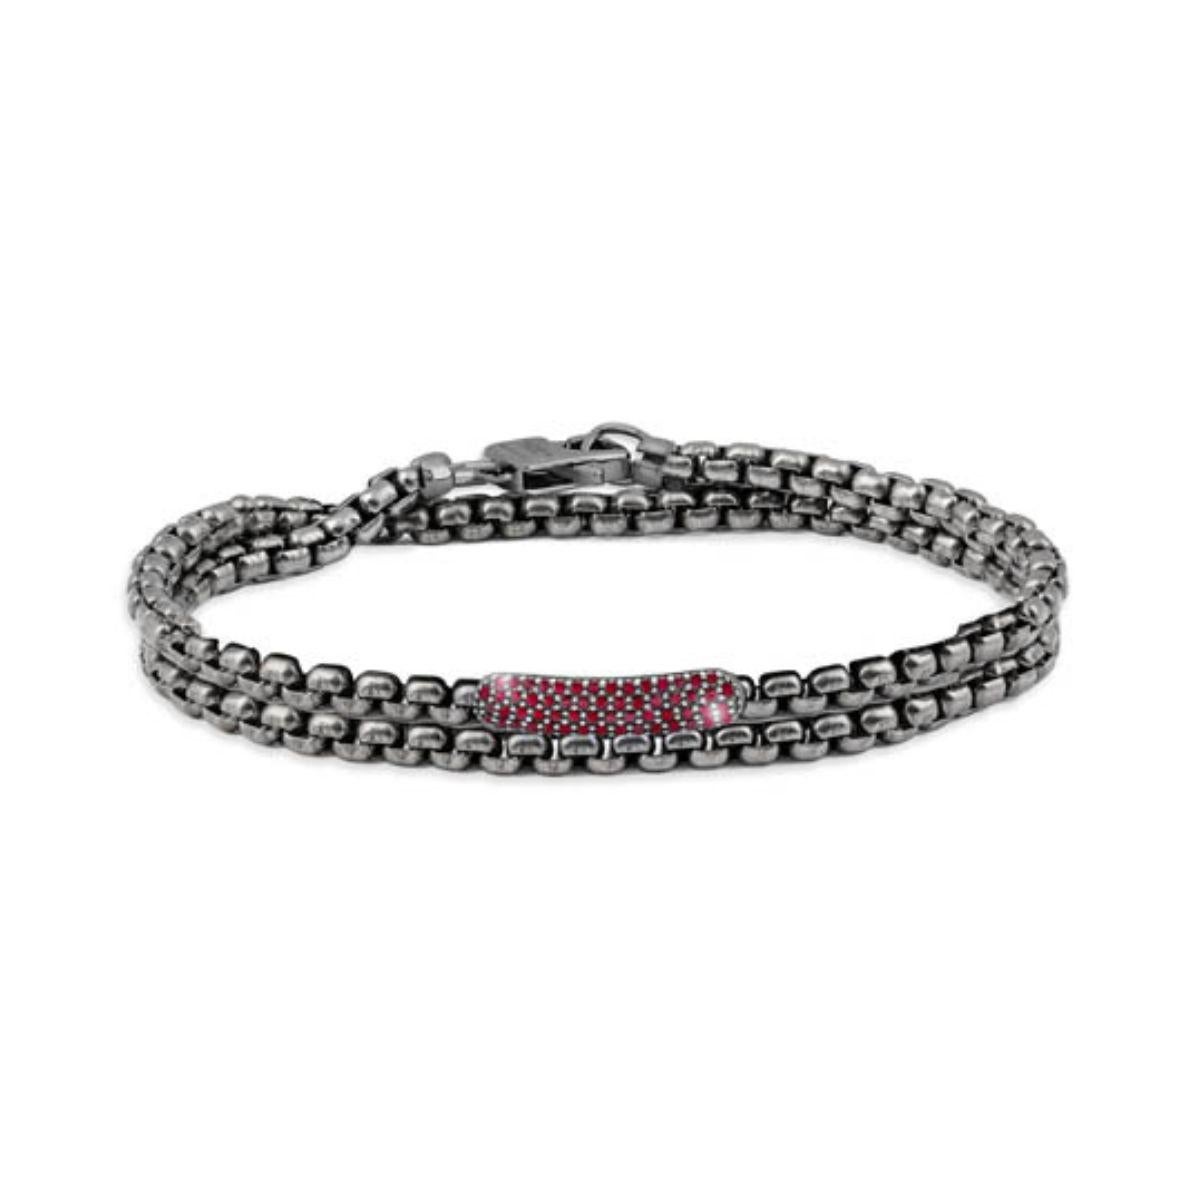 Black Rhodium Plated Sterling Silver Catena Baton Bracelet with Rubies, Size S

The bracelets are handcrafted using carefully selected rare stones and feature a black rhodium-plated sterling silver baton with 0.45cts of sparkling red rubies arranged